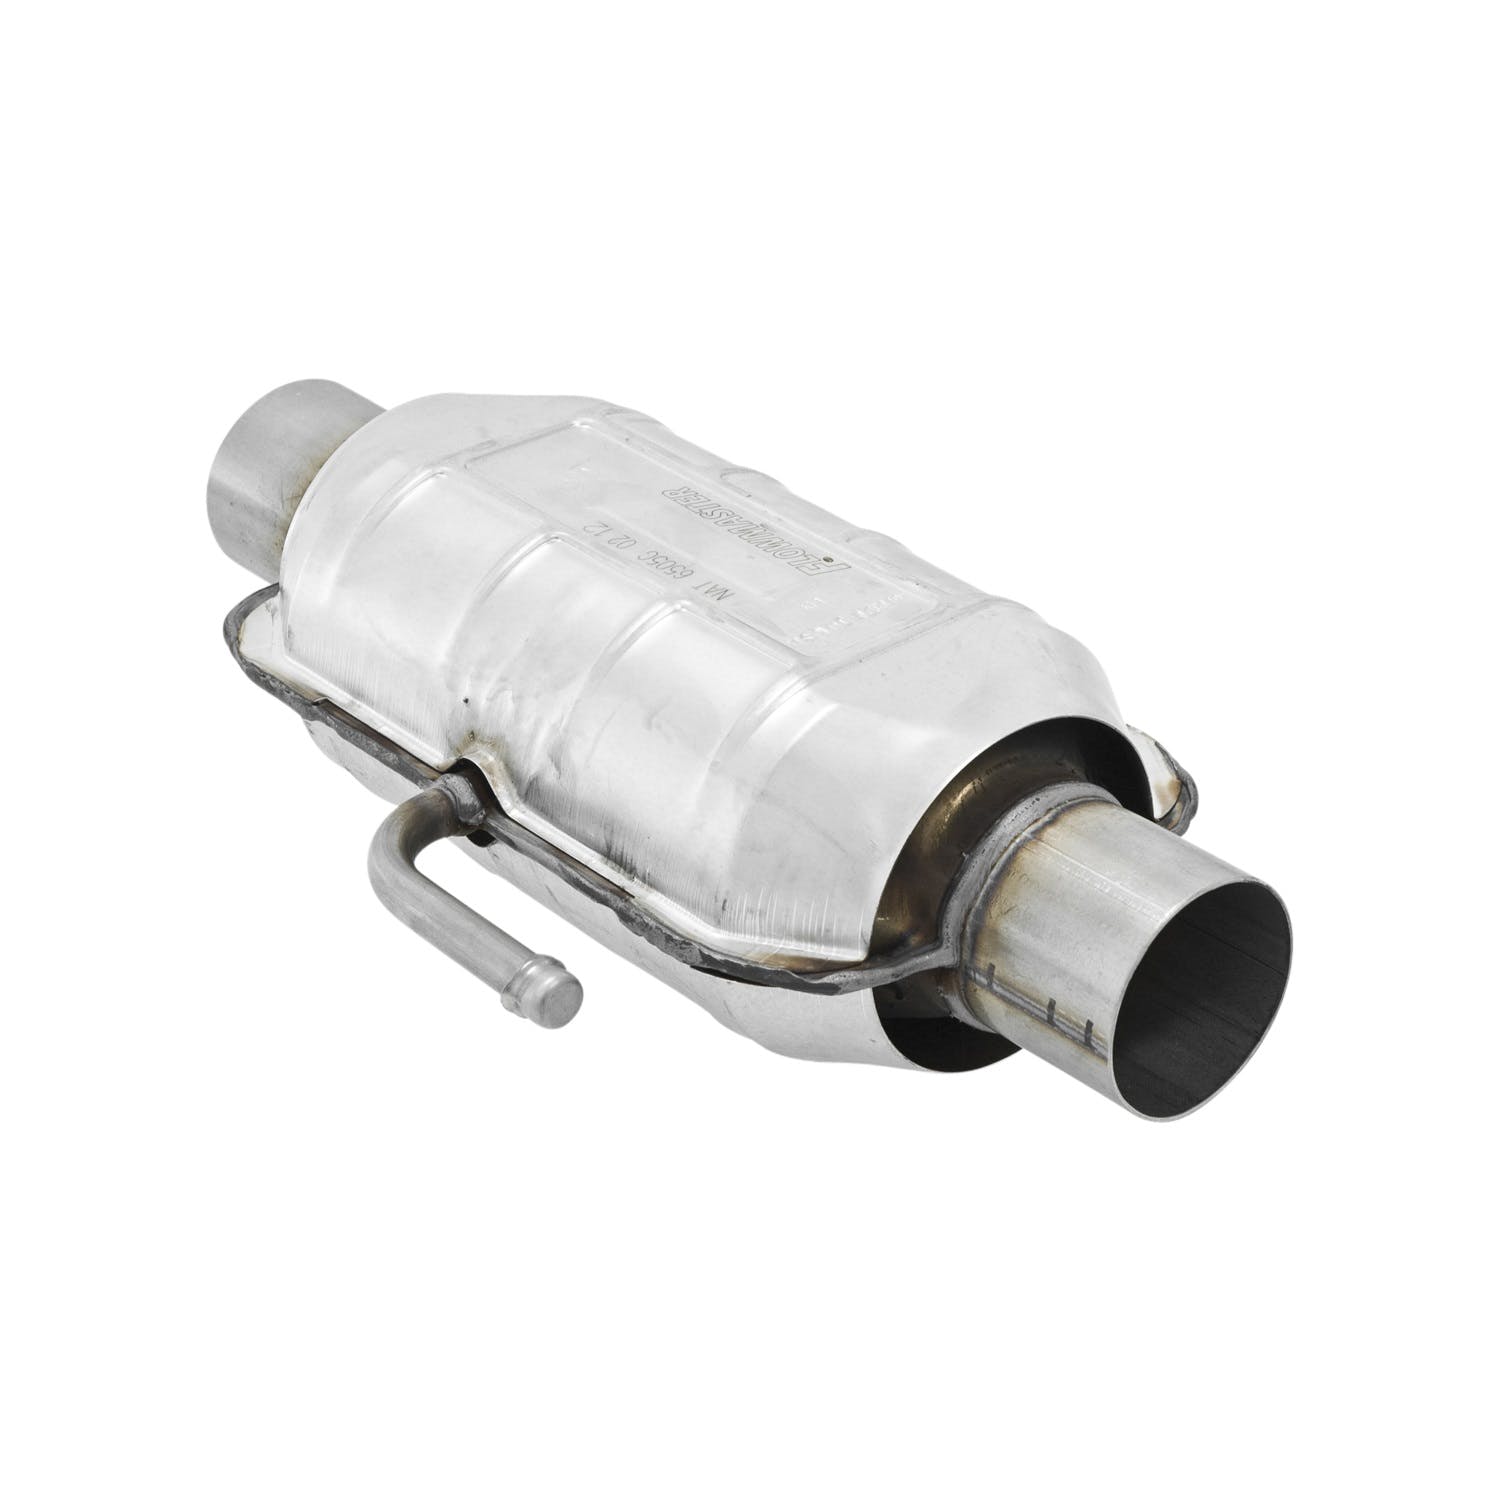 Flowmaster Catalytic Converters 2250224 Catalytic Converter-Universal-225 Series-2.25 in. Inlet/Outlet-49 State